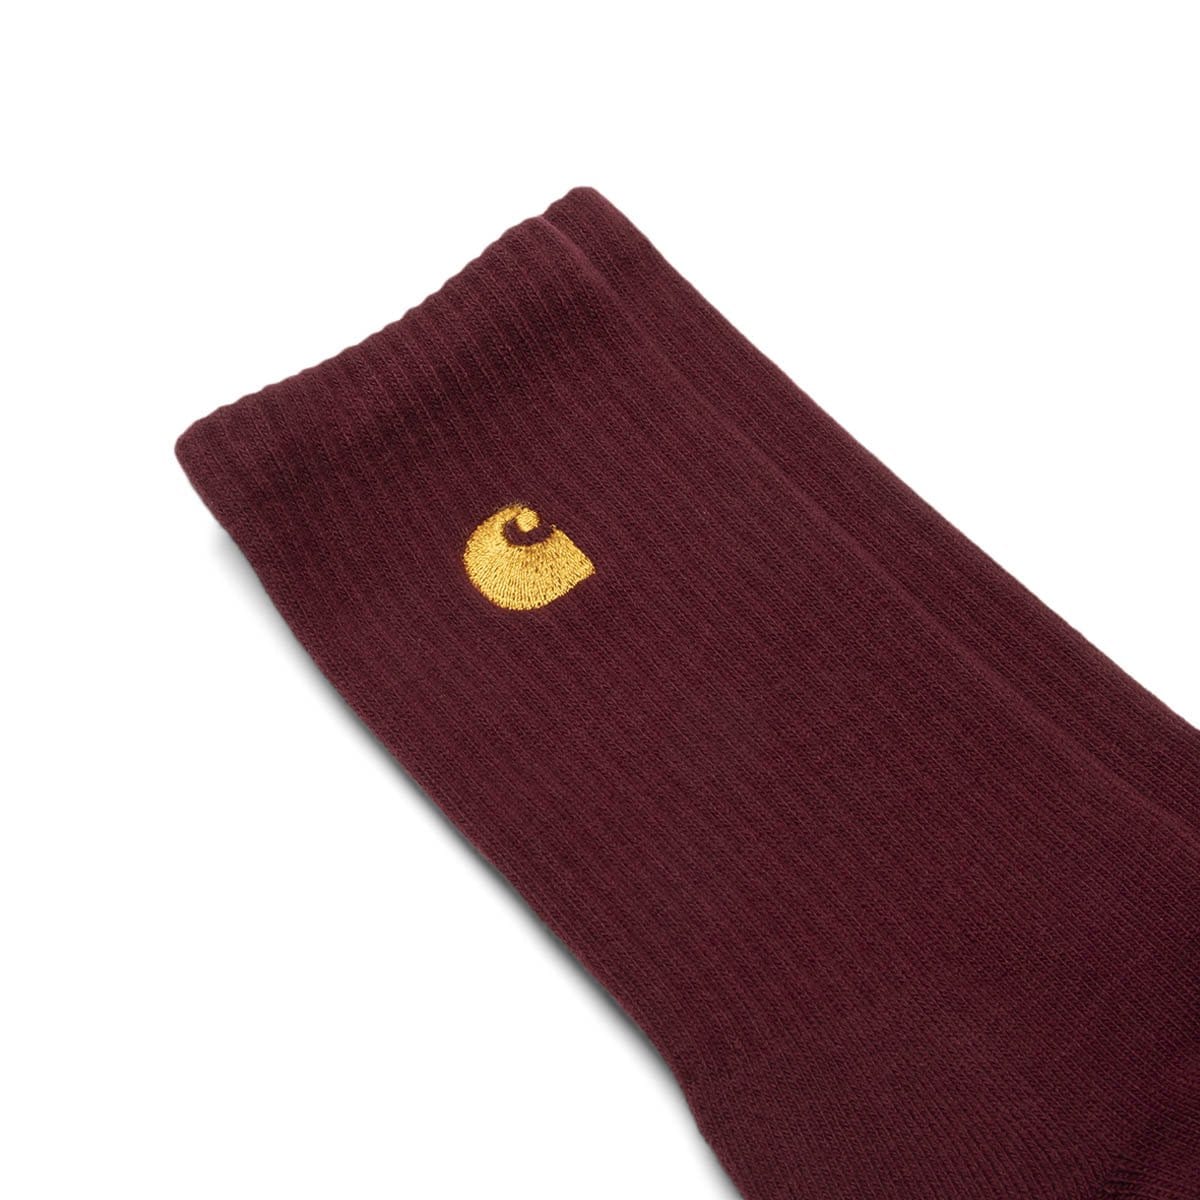 Carhartt W.I.P. Bags & Accessories BORDEAUX/GOLD / OS CHASE SOCKS